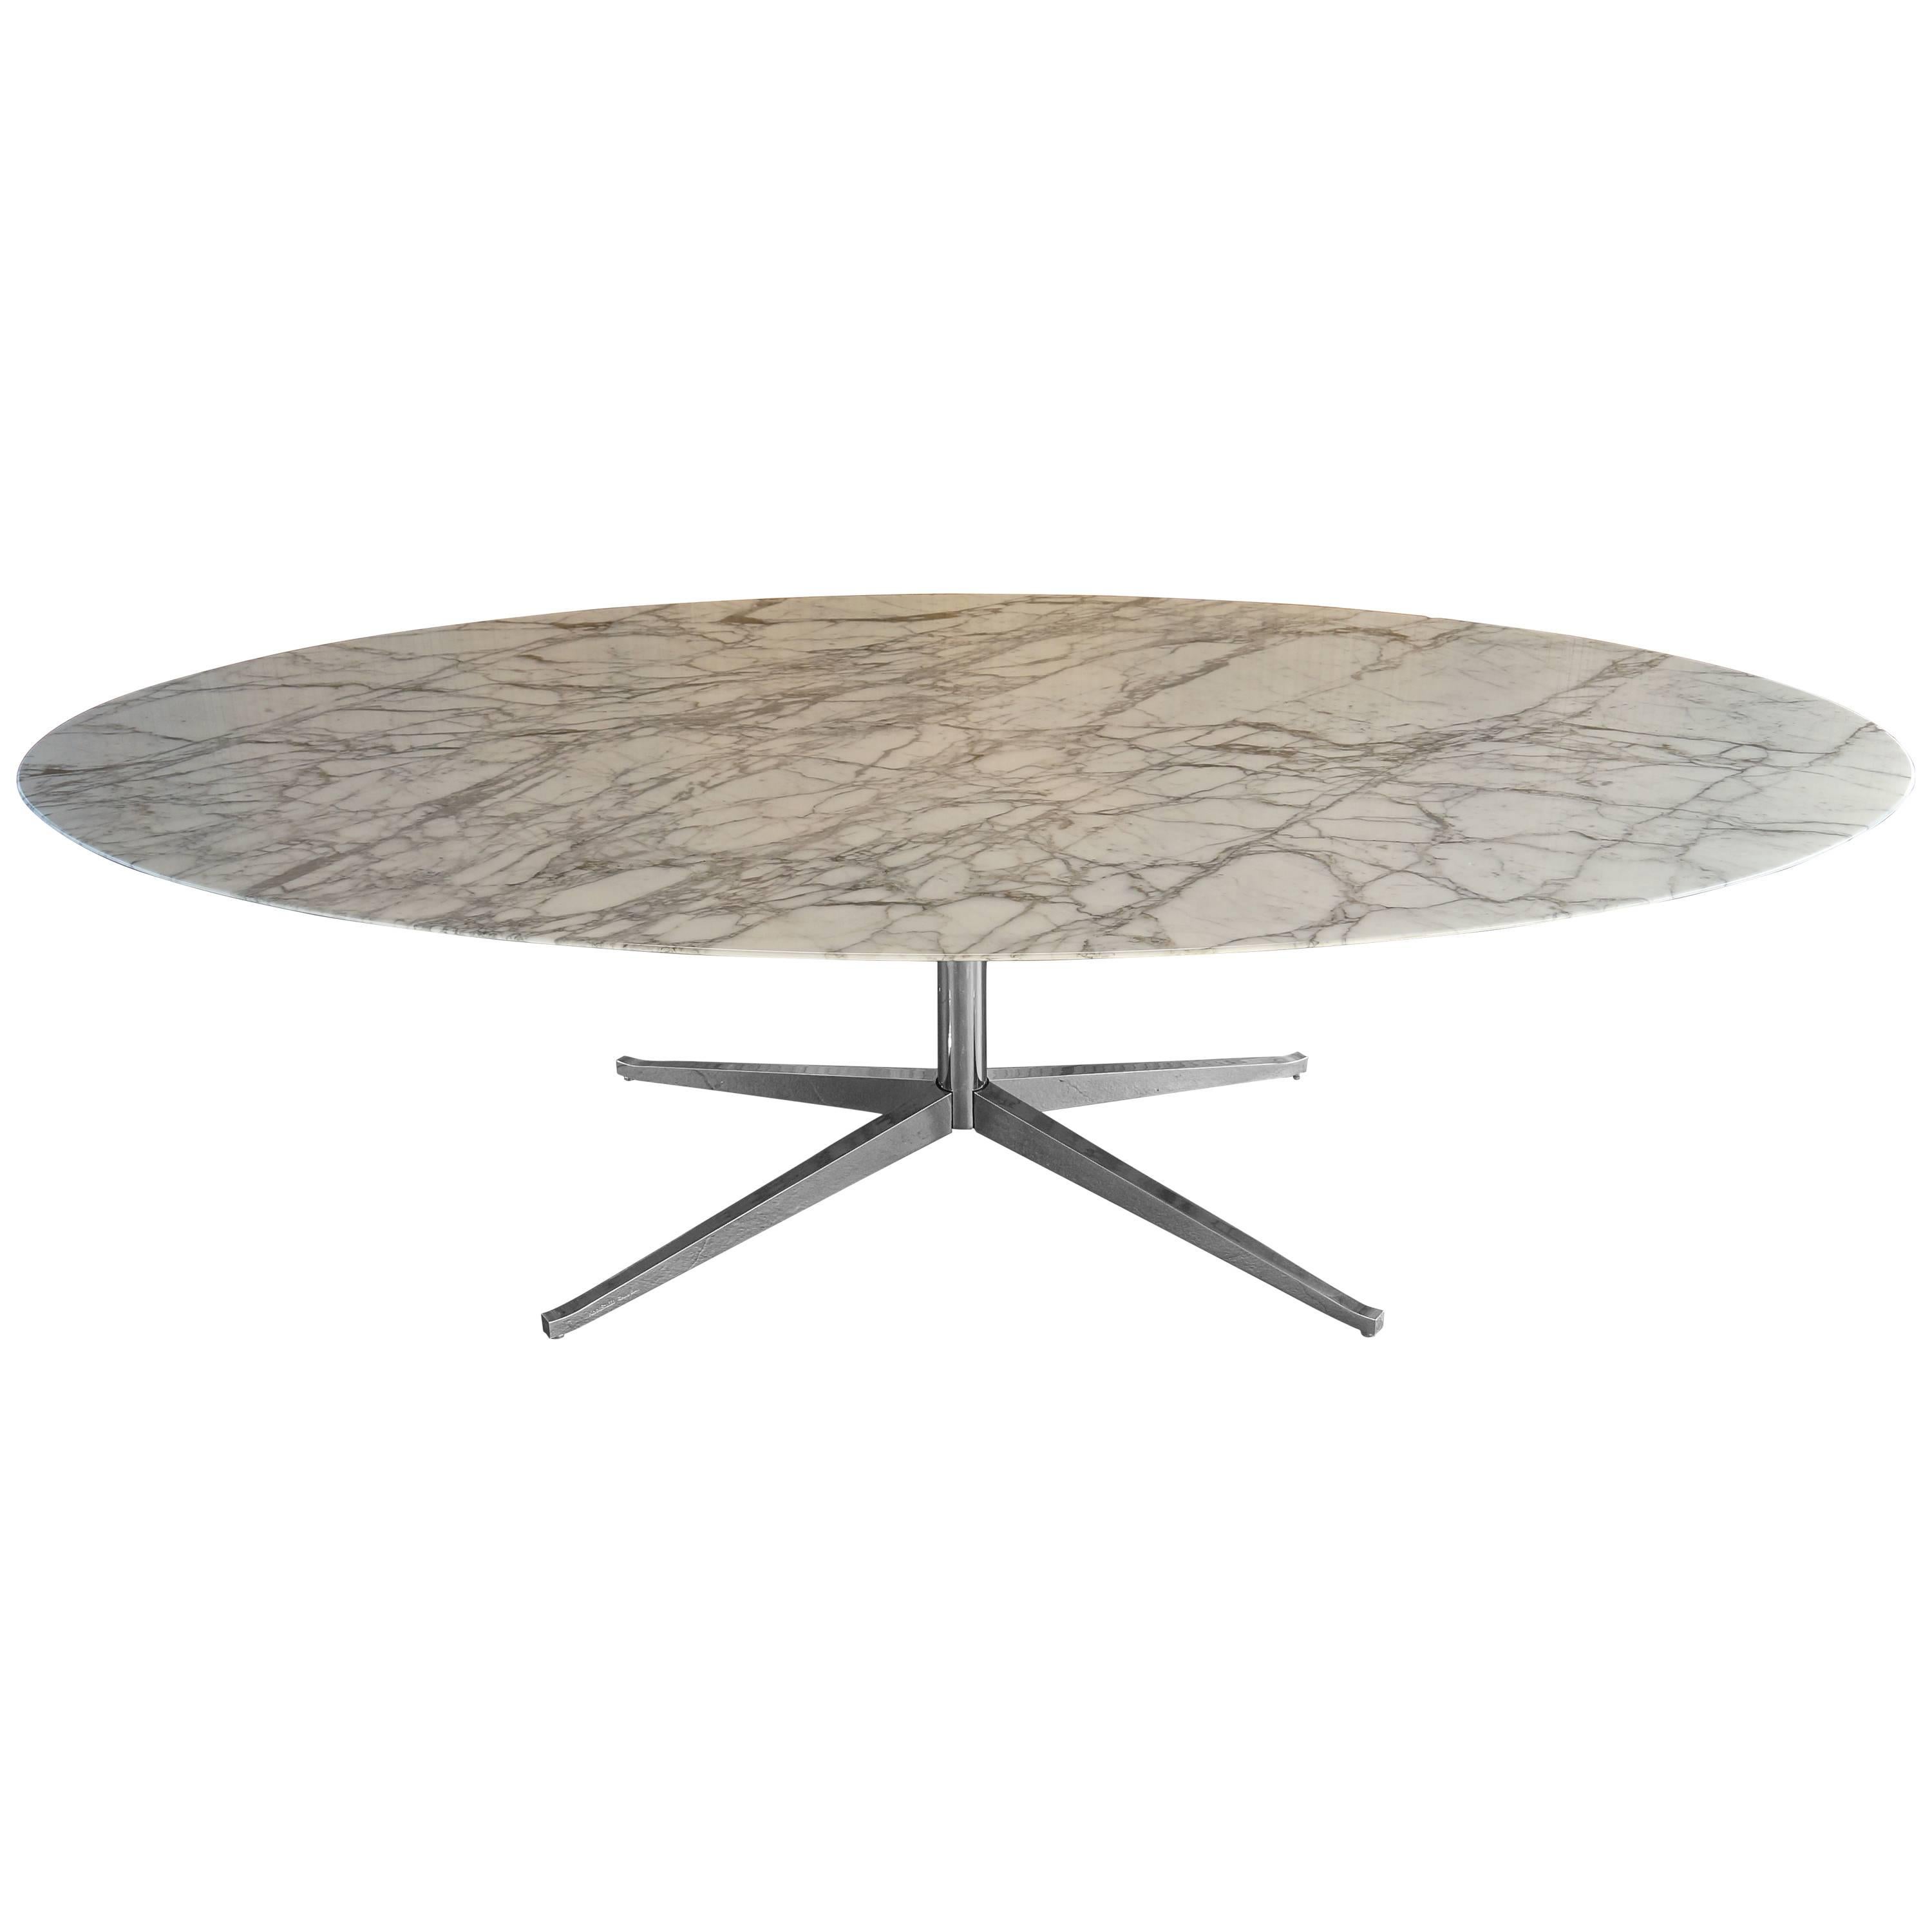 Florence Knoll White Calacatta Oval Marble Dining Table, Desk / Tulip Table For Sale